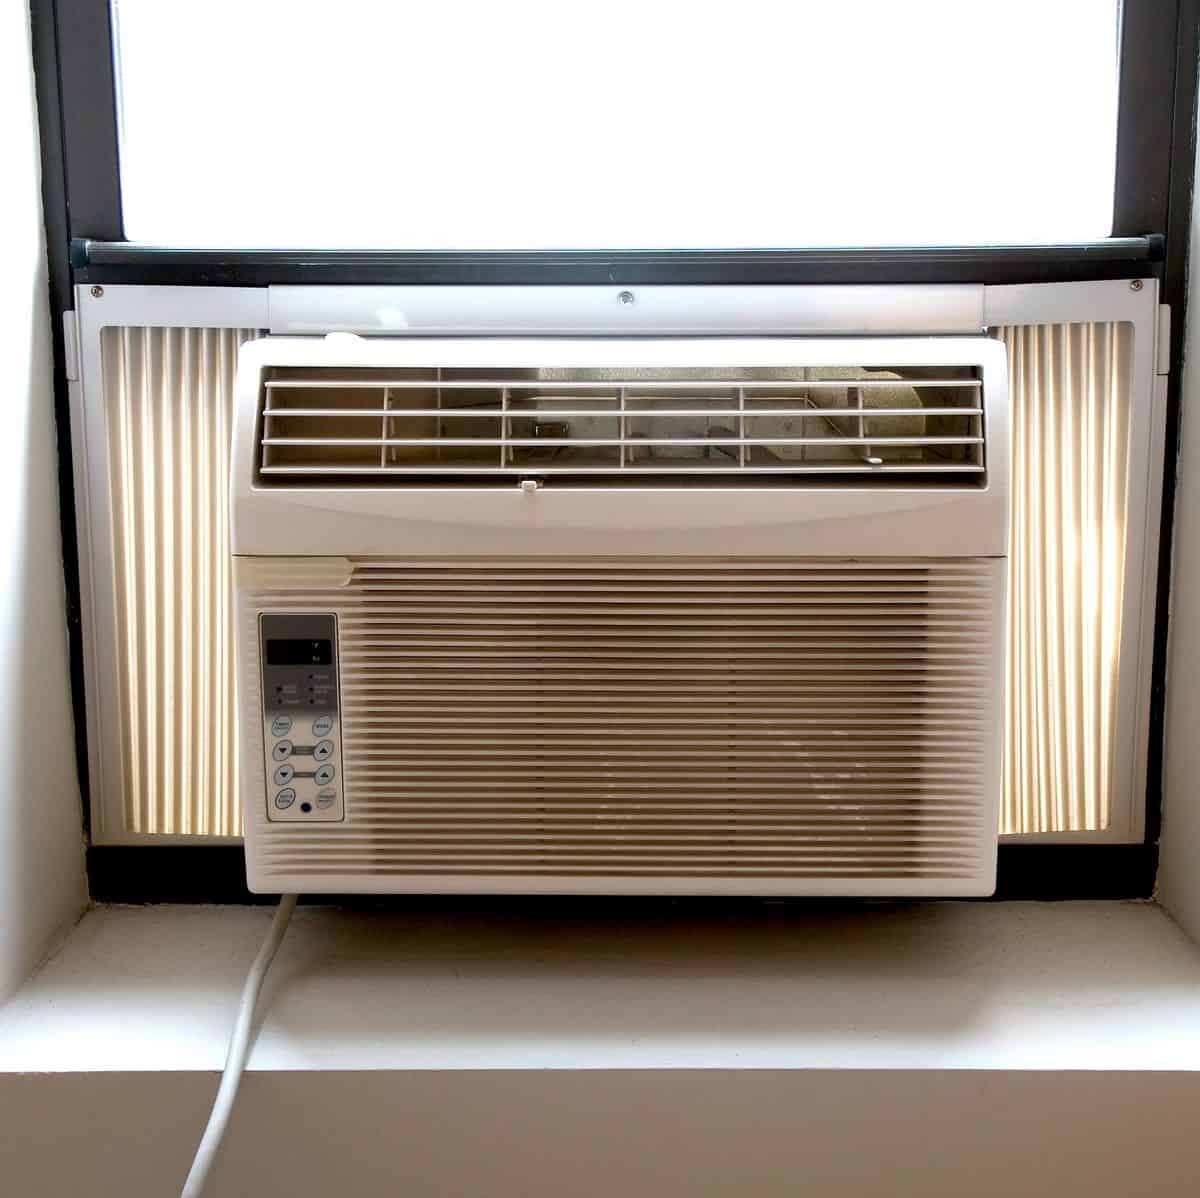 Use an AC unit window extension